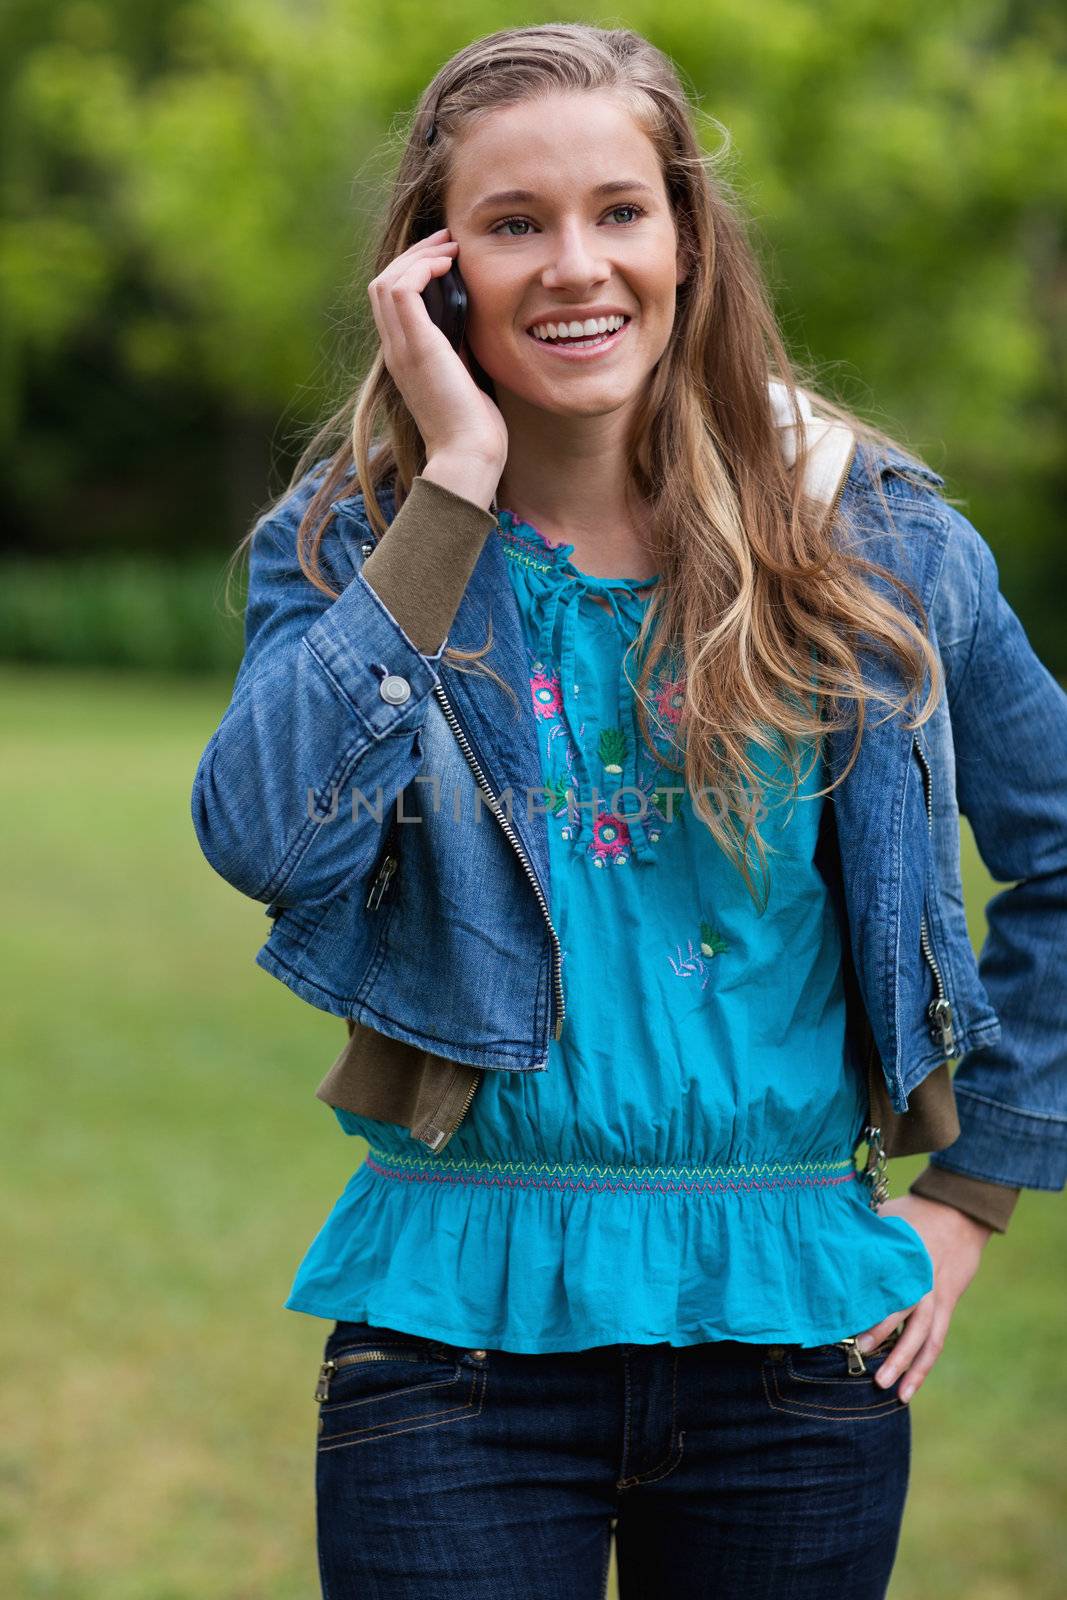 Smiling teenage girl talking on the phone while standing in a pa by Wavebreakmedia